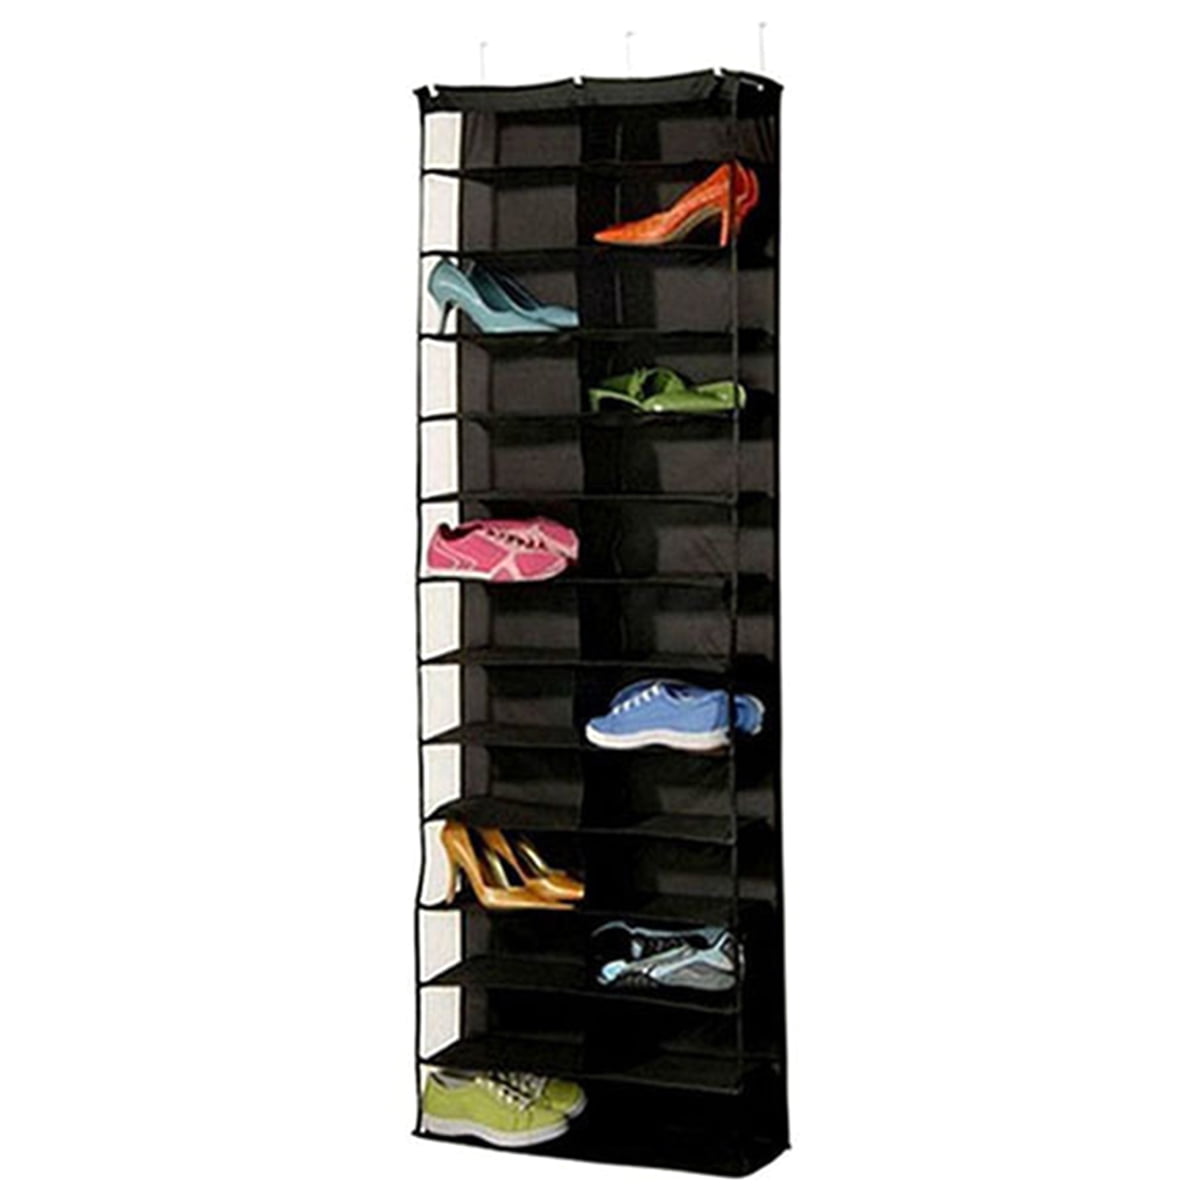 Dropship 10 Tier Over The Door Shoe Rack Organizer Holder Hanging Storage  Shelf For Closet Pantry Space Saver to Sell Online at a Lower Price